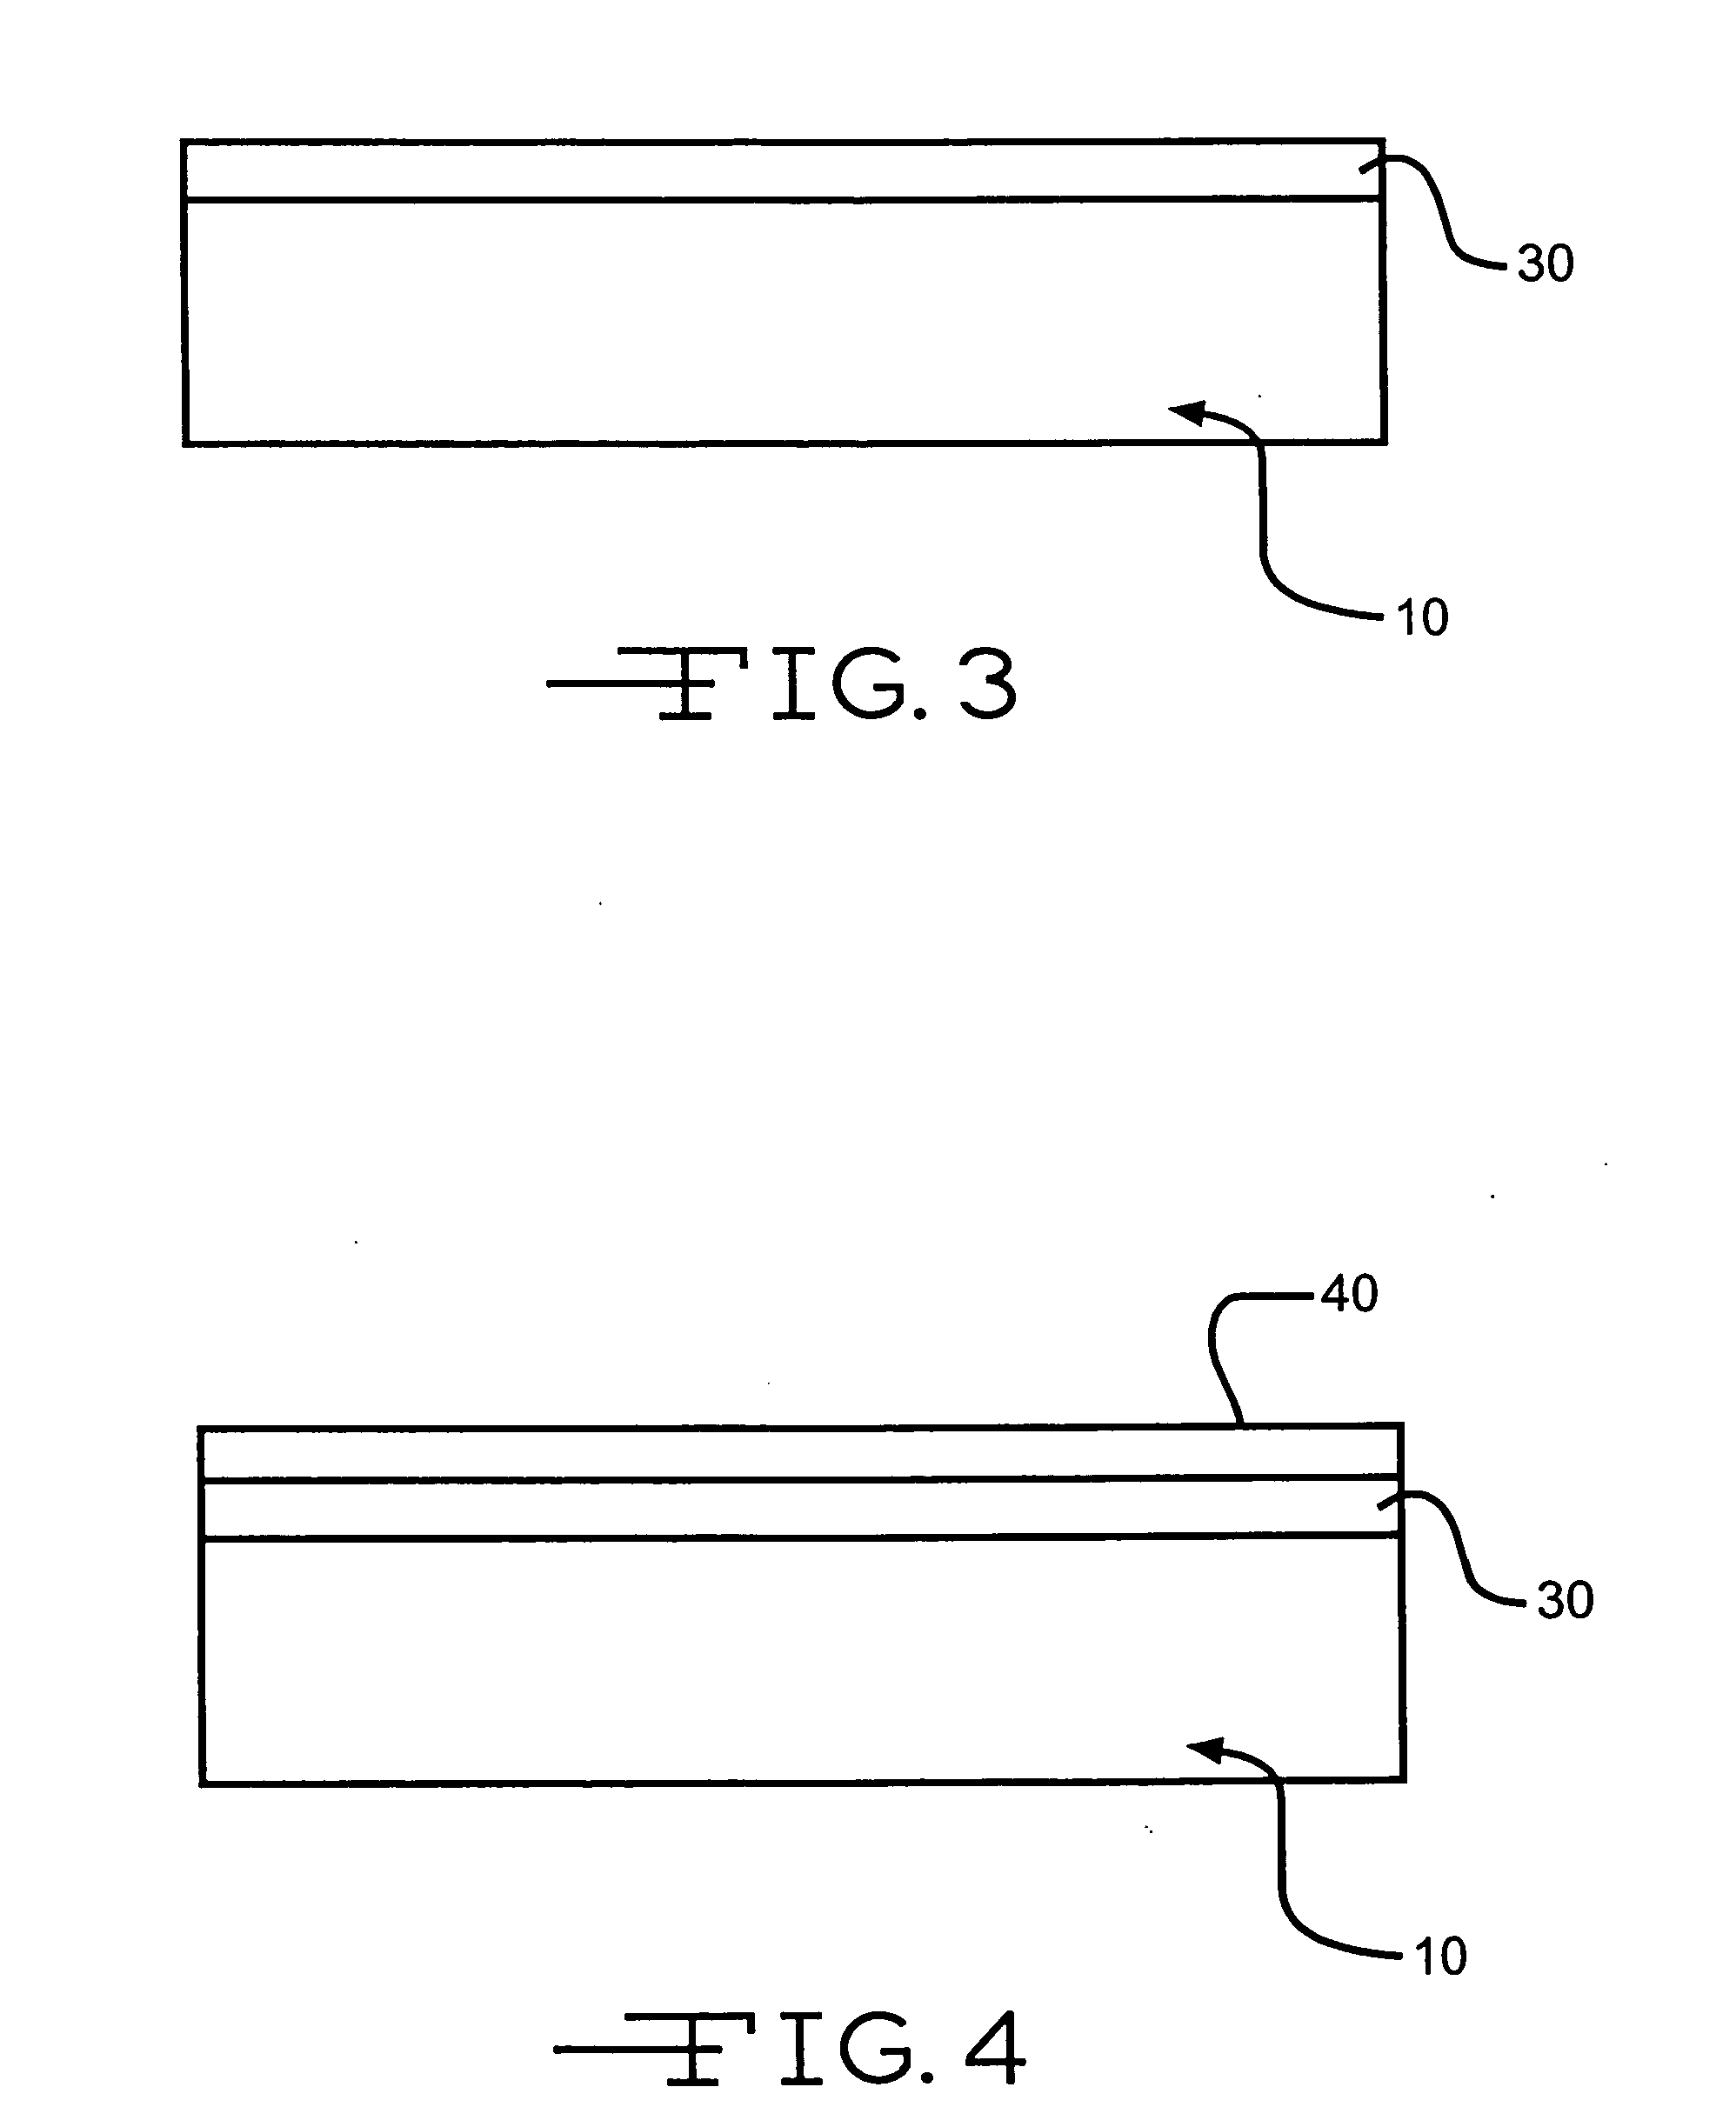 Method for improving electrical conductivity of metals, metal alloys and metal oxides